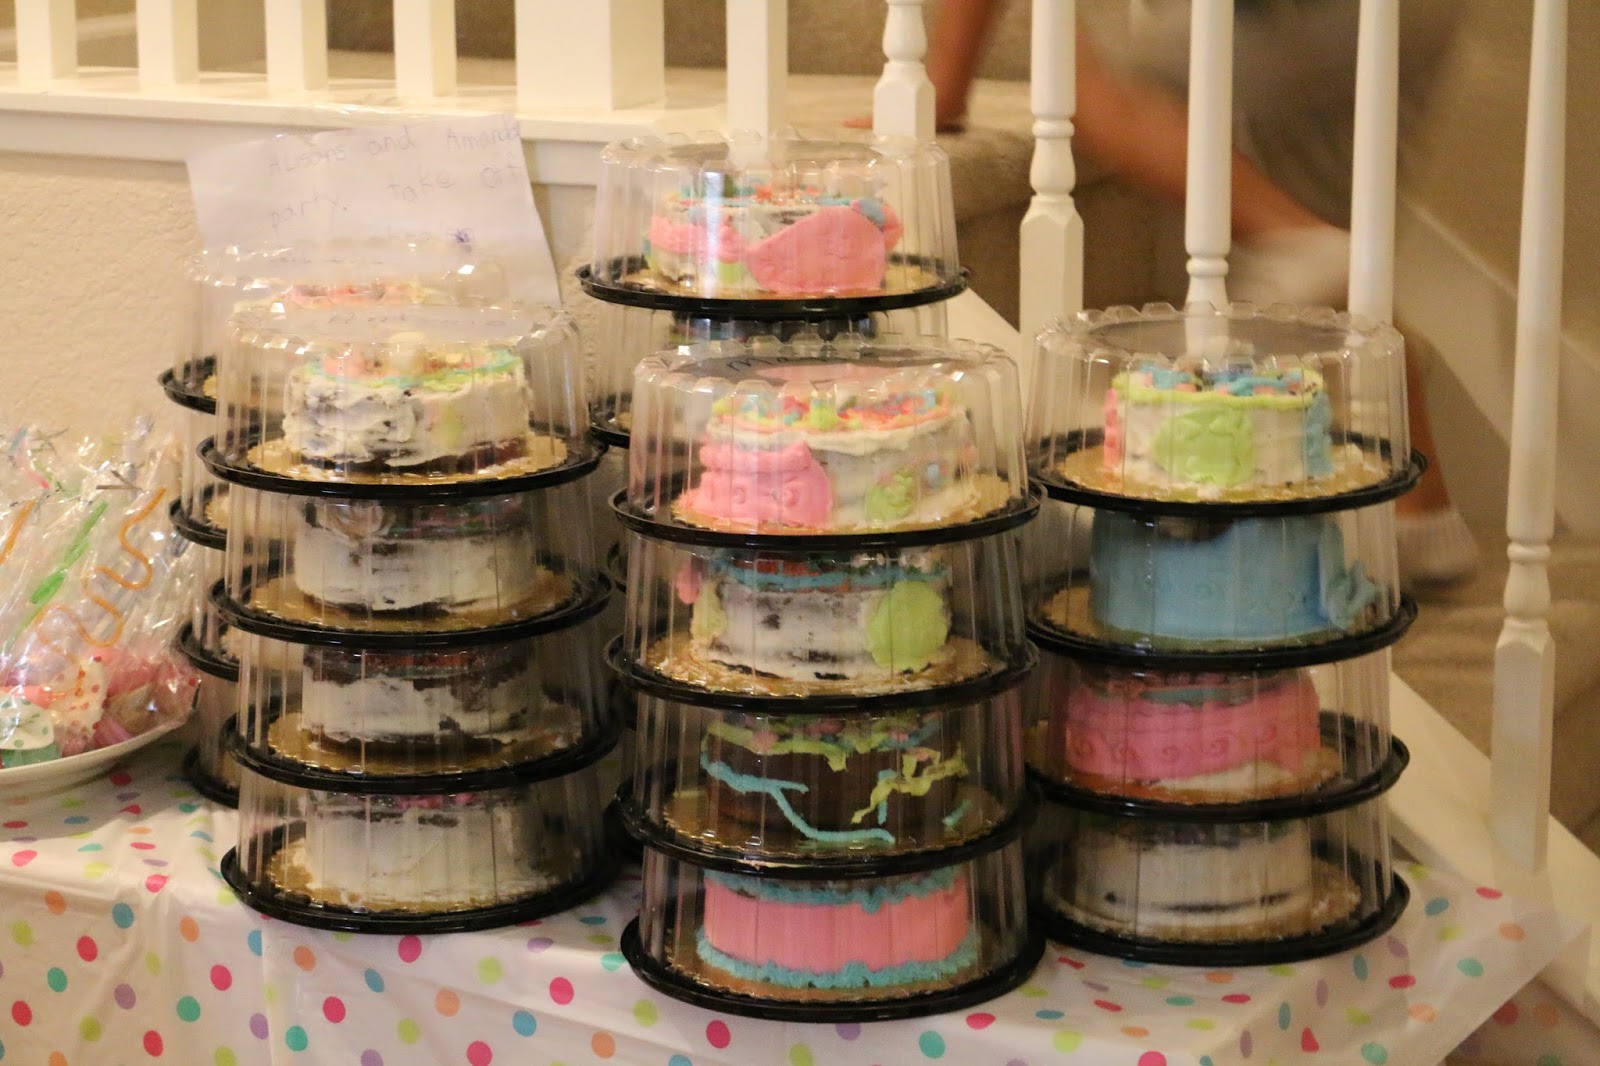 How to Throw a Cake Decorating Cake Party!